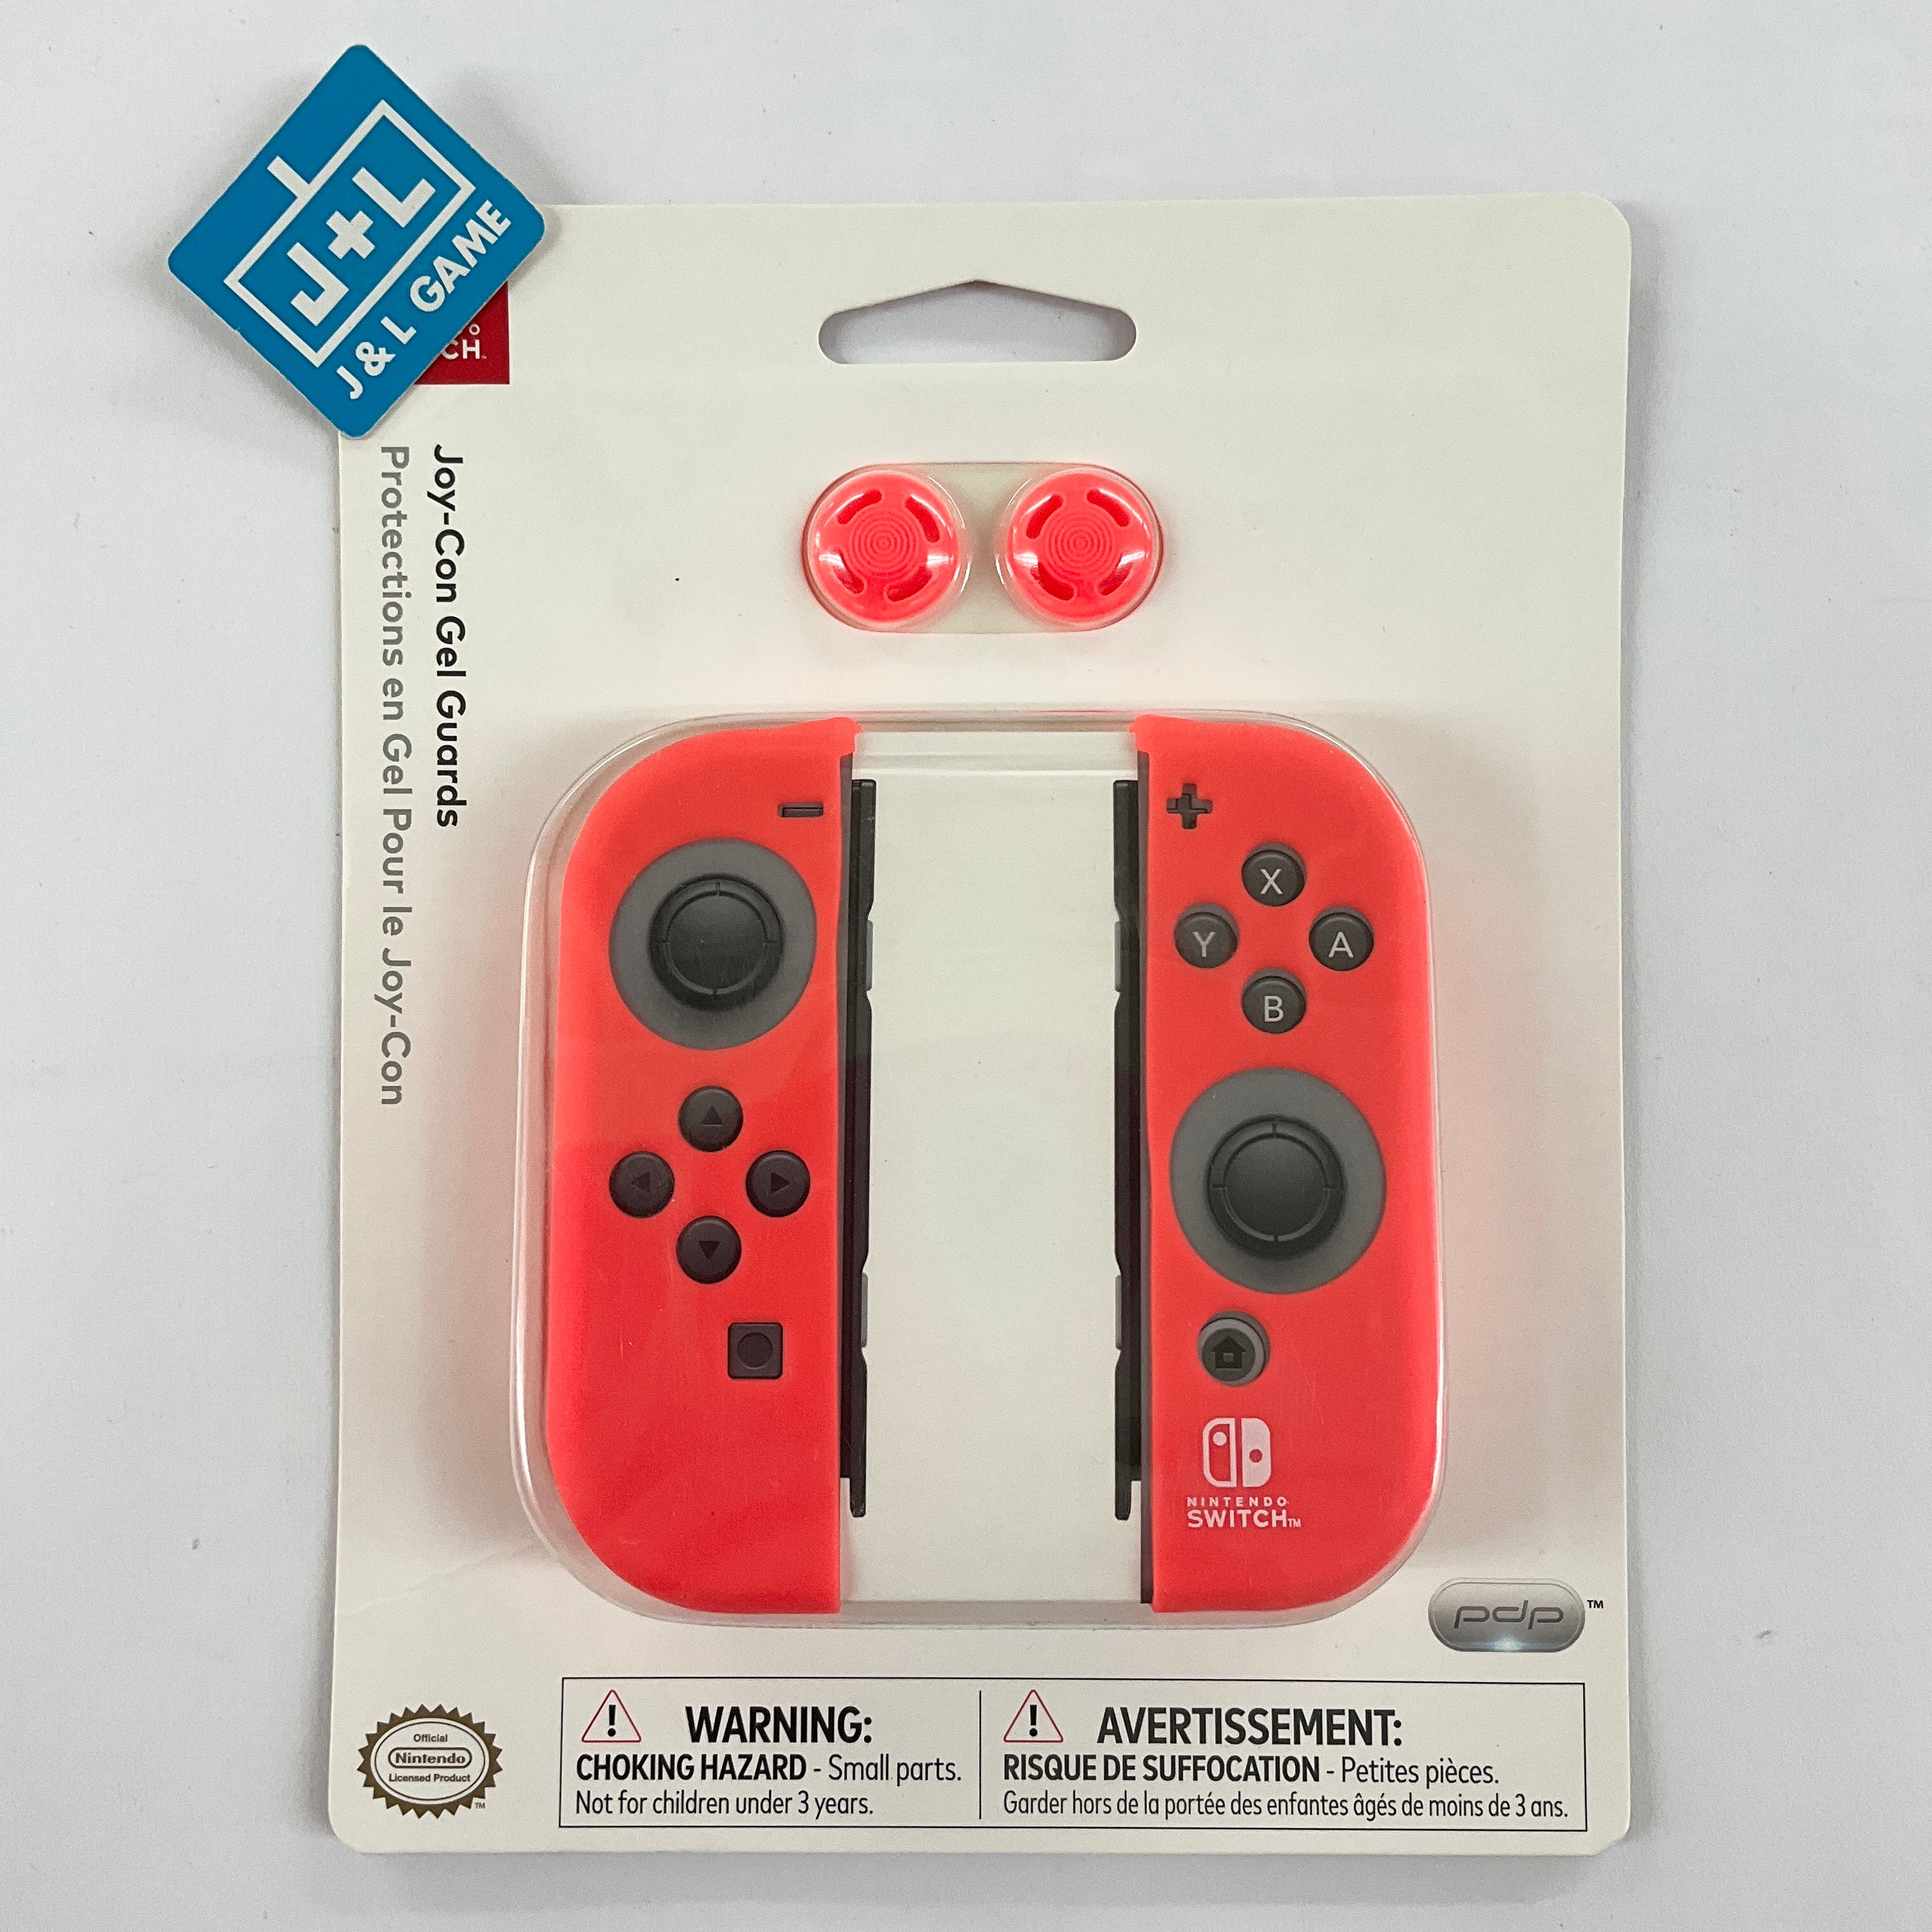 PDP Joy-Con Gel Guards (Red) - (NSW) Nintendo Switch Accessories PDP   